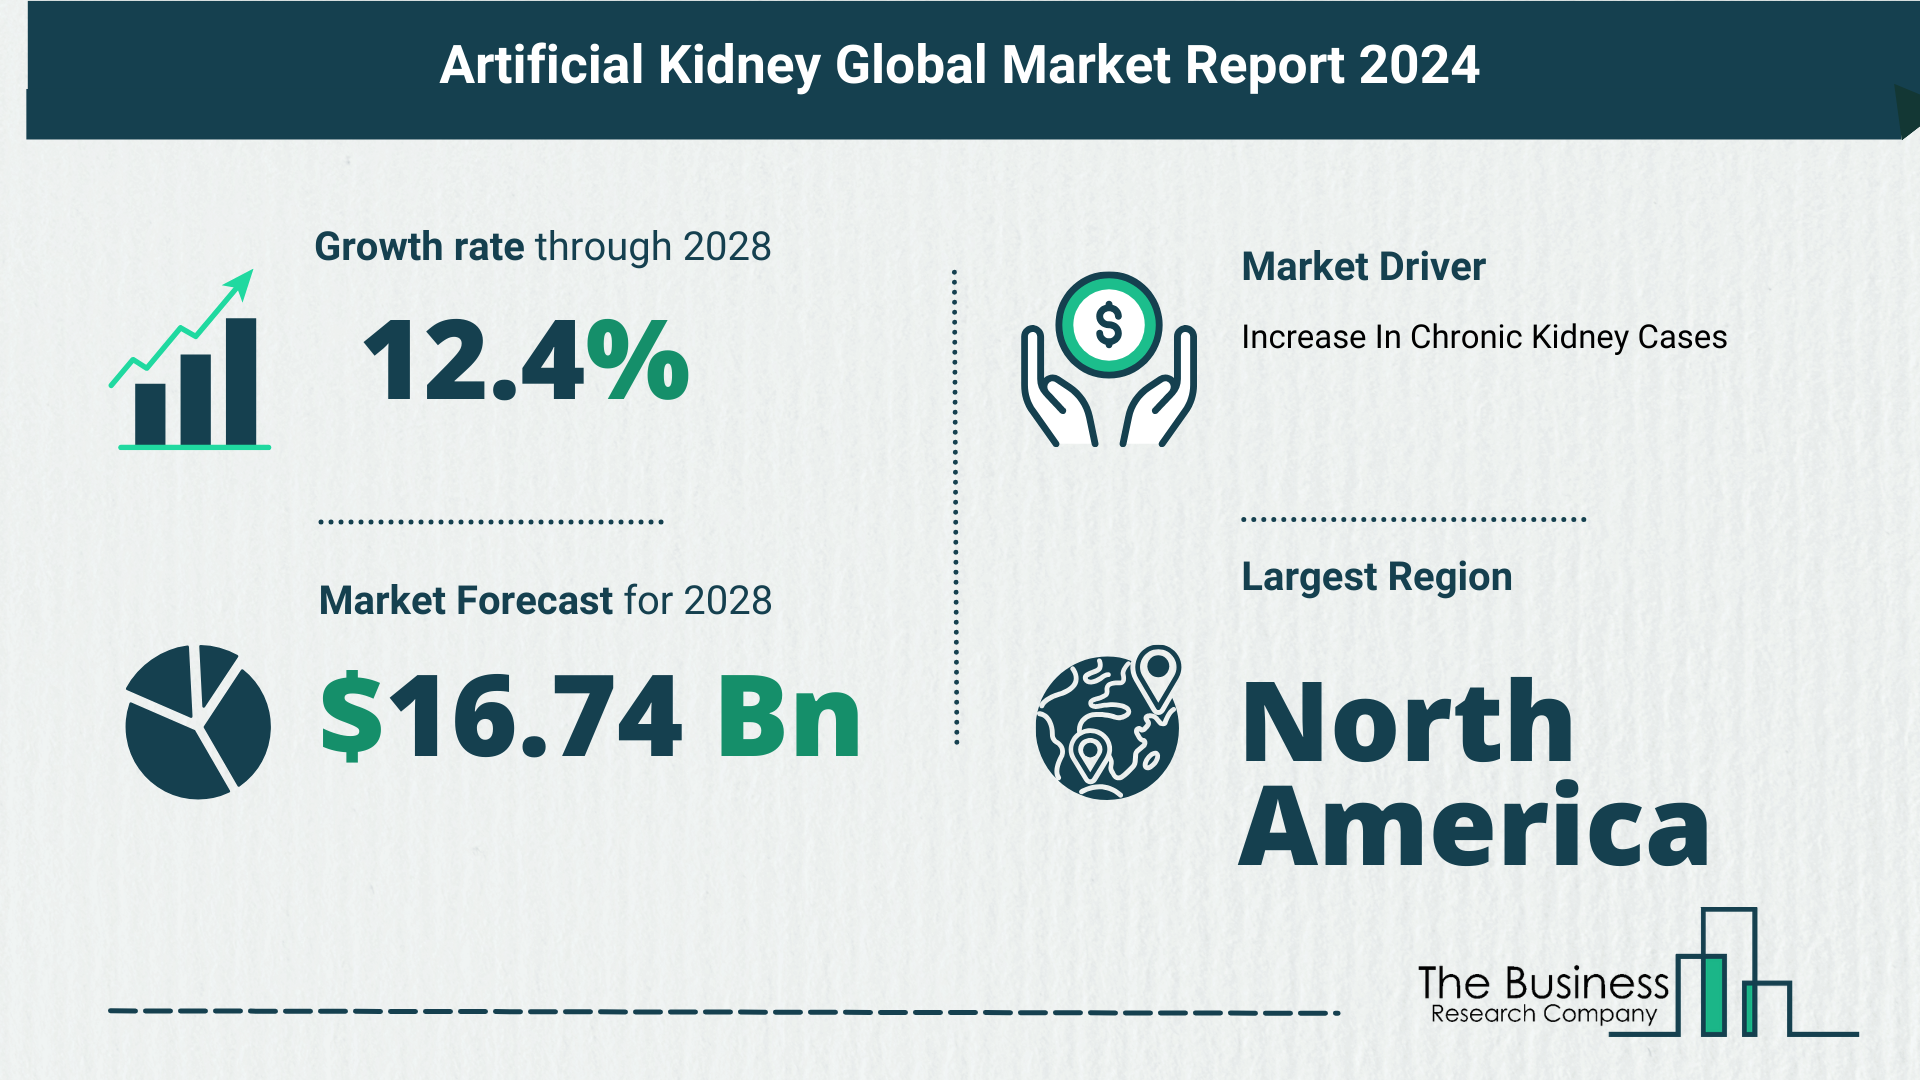 5 Takeaways From The Artificial Kidney Market Overview 2024